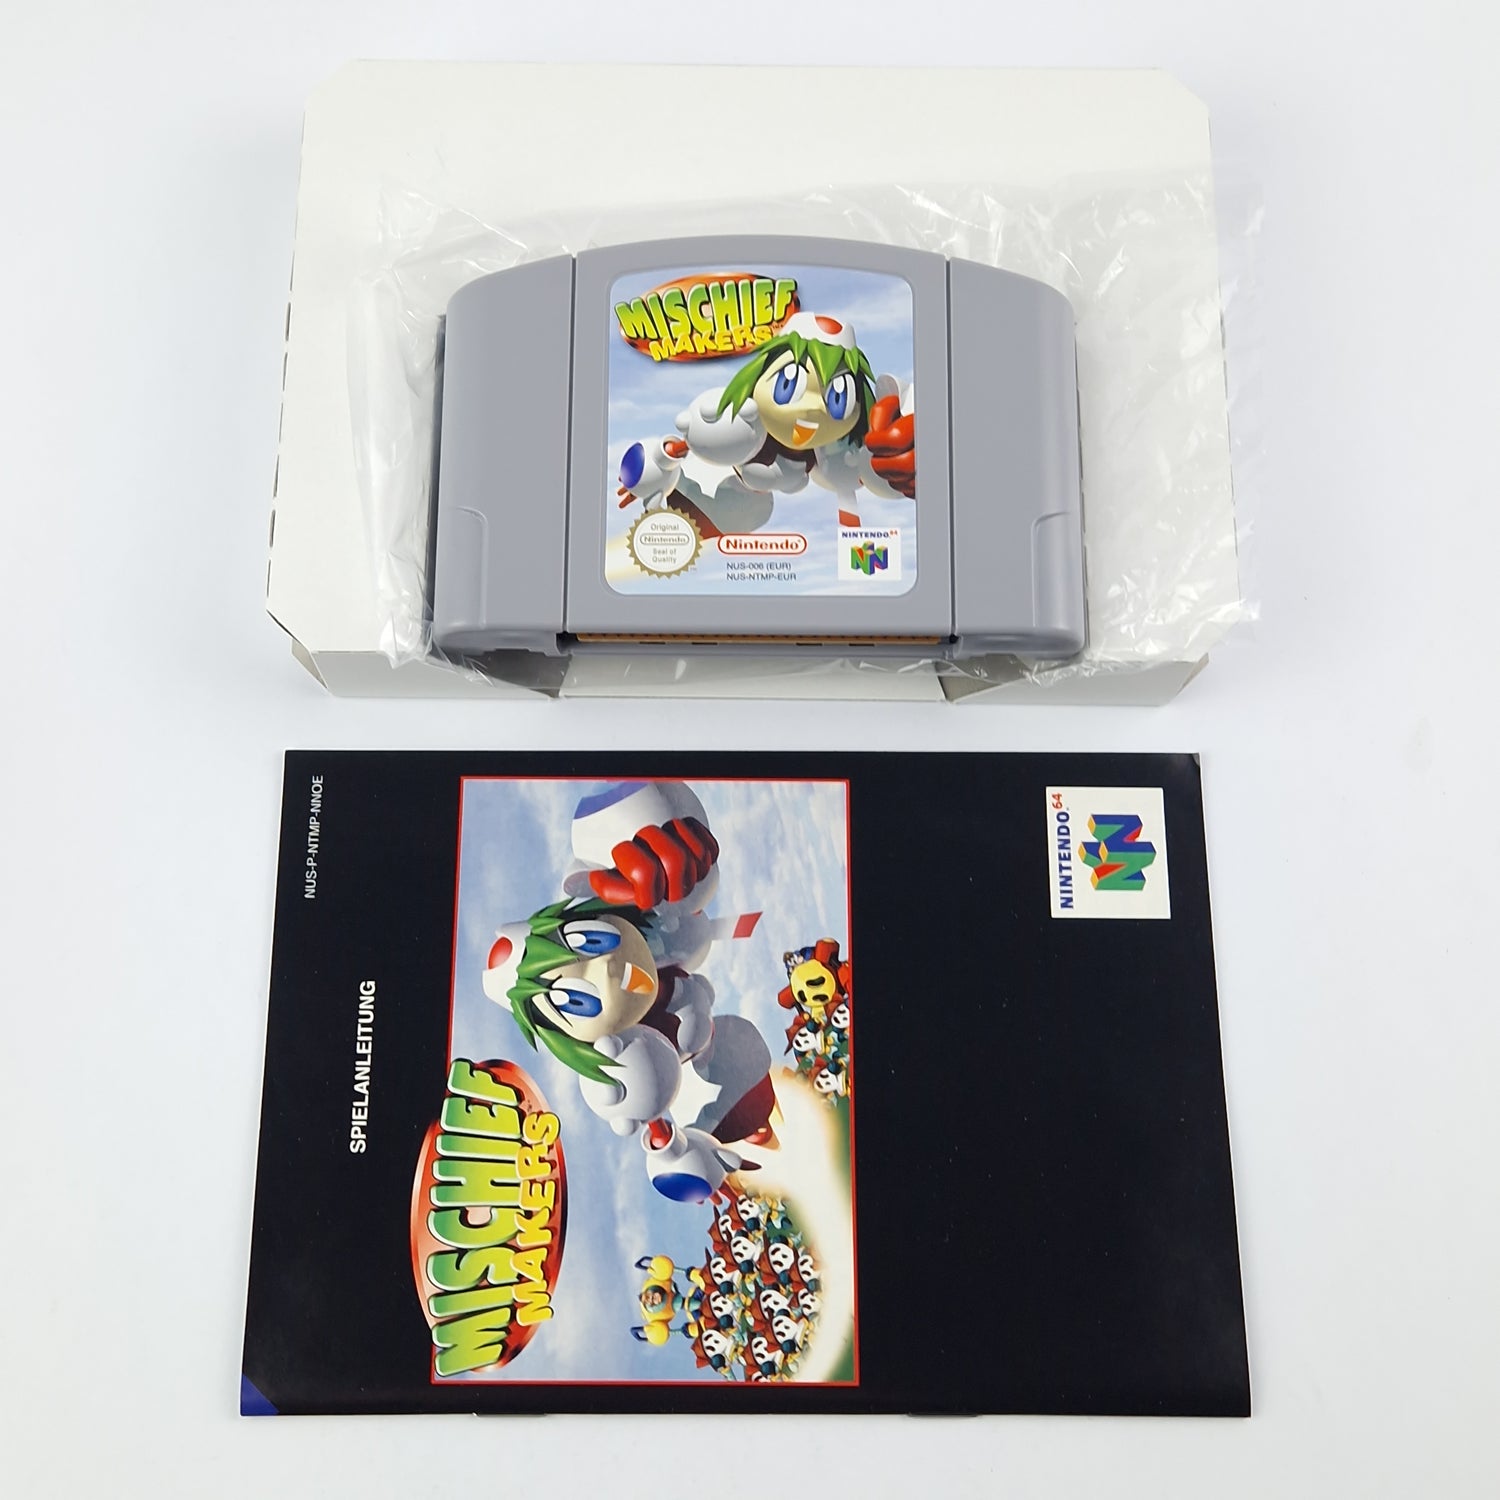 Nintendo 64 Game: Mischief Makers - Module Instructions OVP CIB / N64 PAL Game